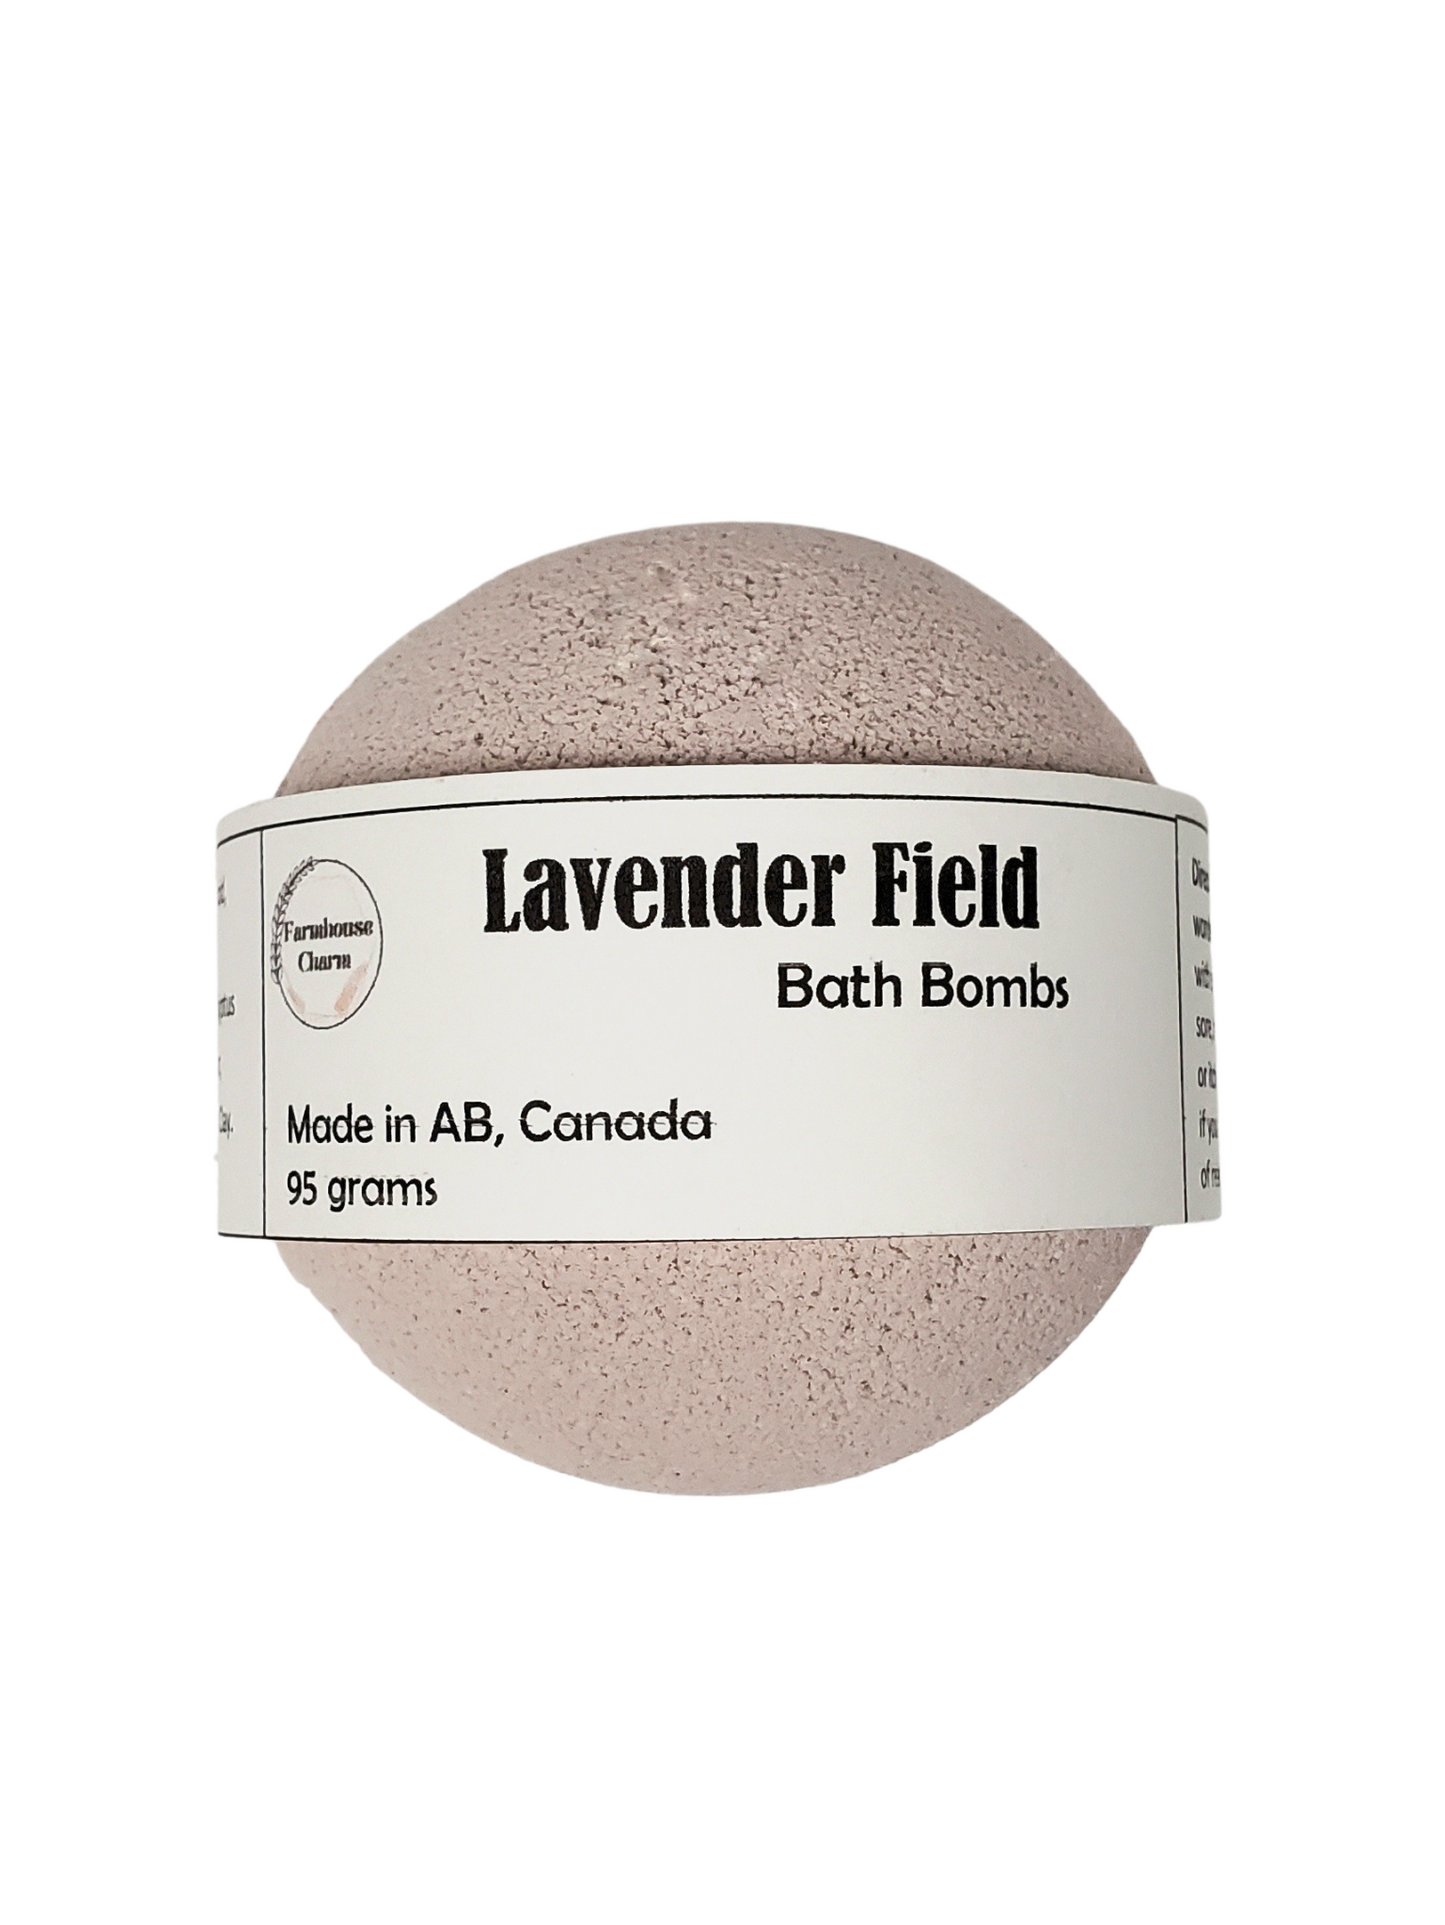 Lavender Field Bath Bomb- Farmhouse Charm is made with all natural ingredients and infused with essential oils. Drop or hold in bath water. Enjoy the fizzing action, wonderful aromas and nourishing oils.